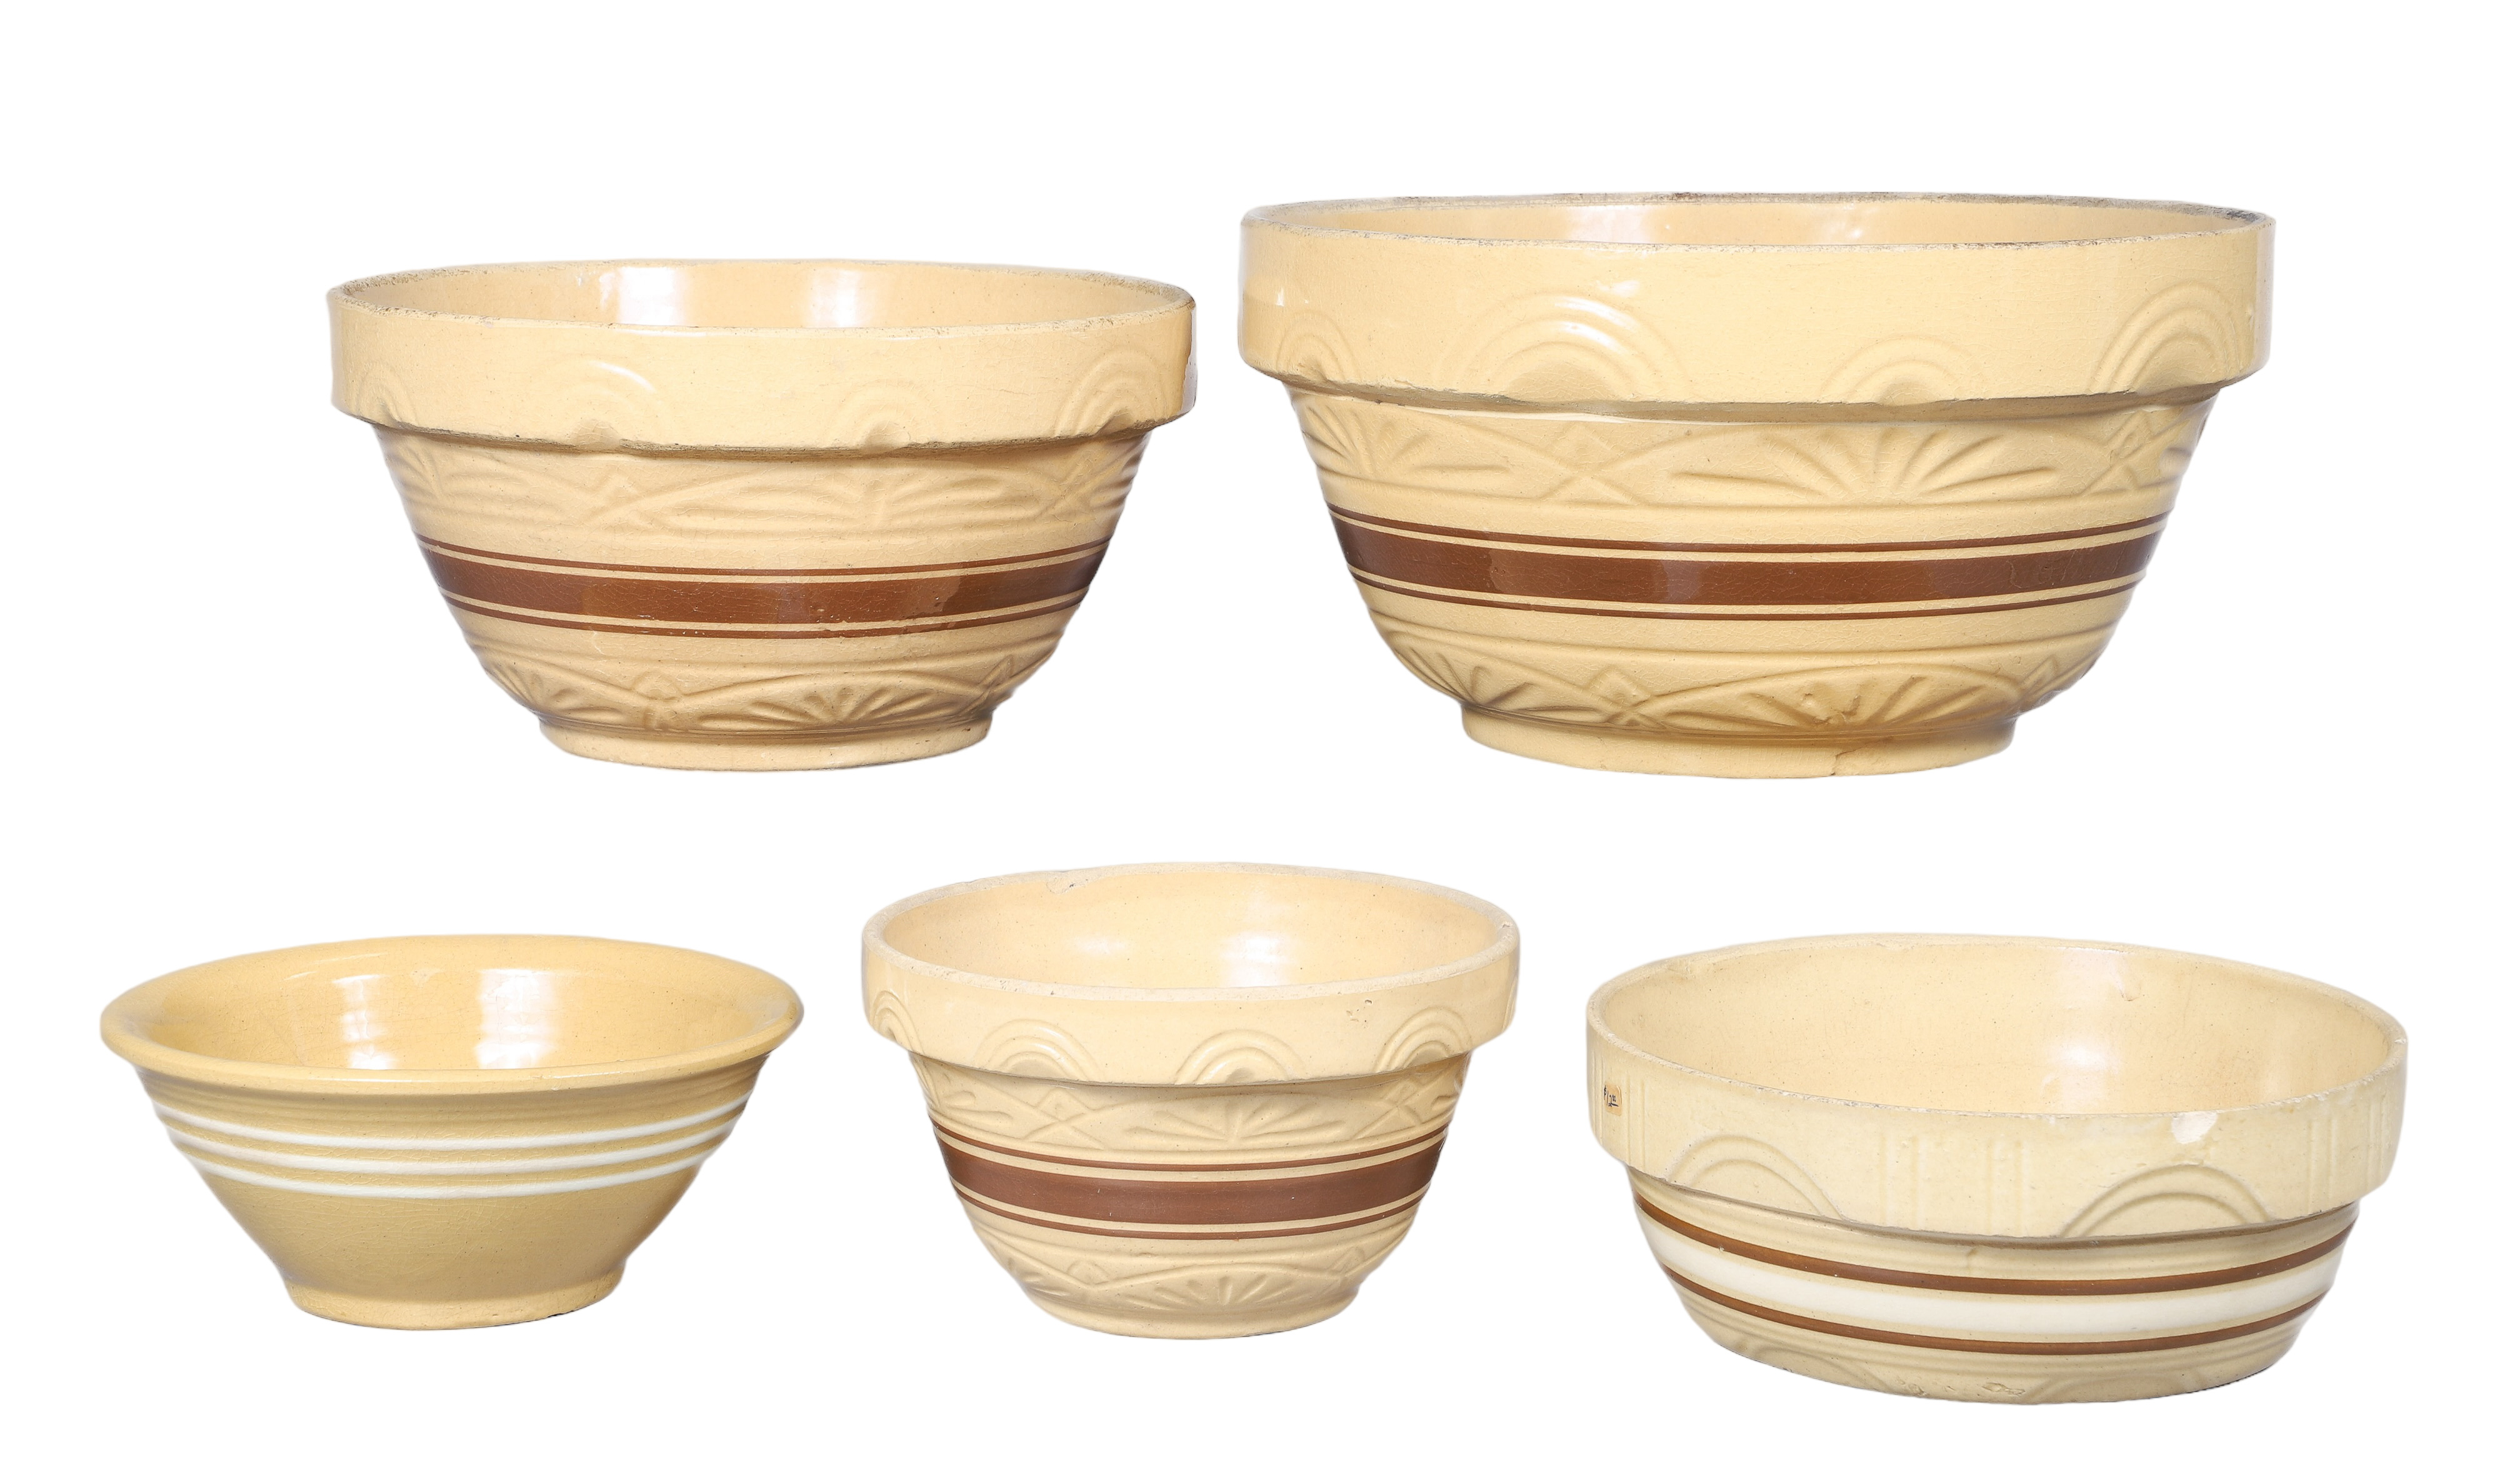  5 Stoneware mixing bowls to include 2e1aad